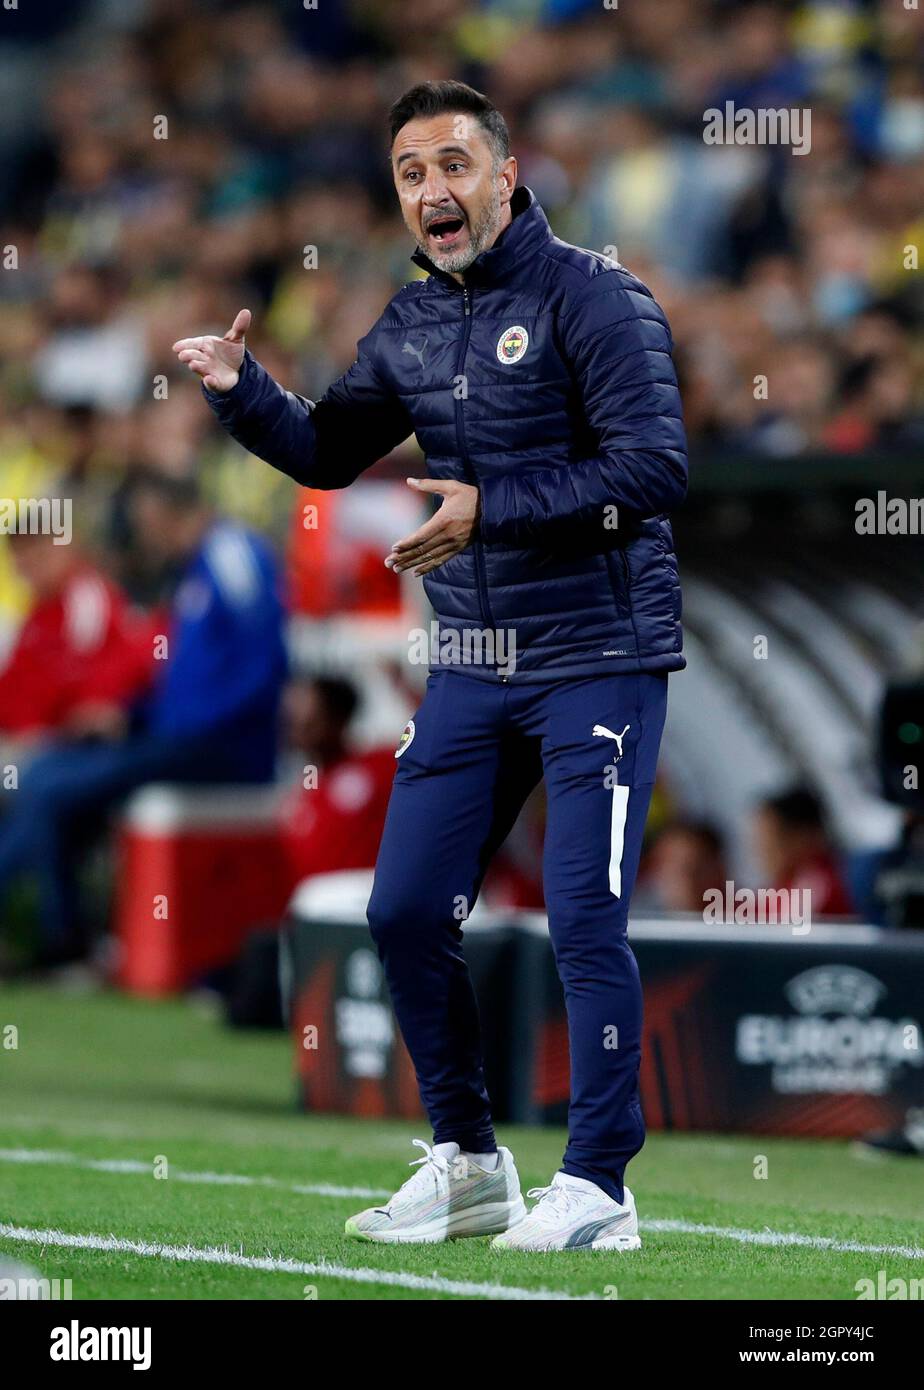 Vitor Pereira High Resolution Stock Photography and Images - Alamy